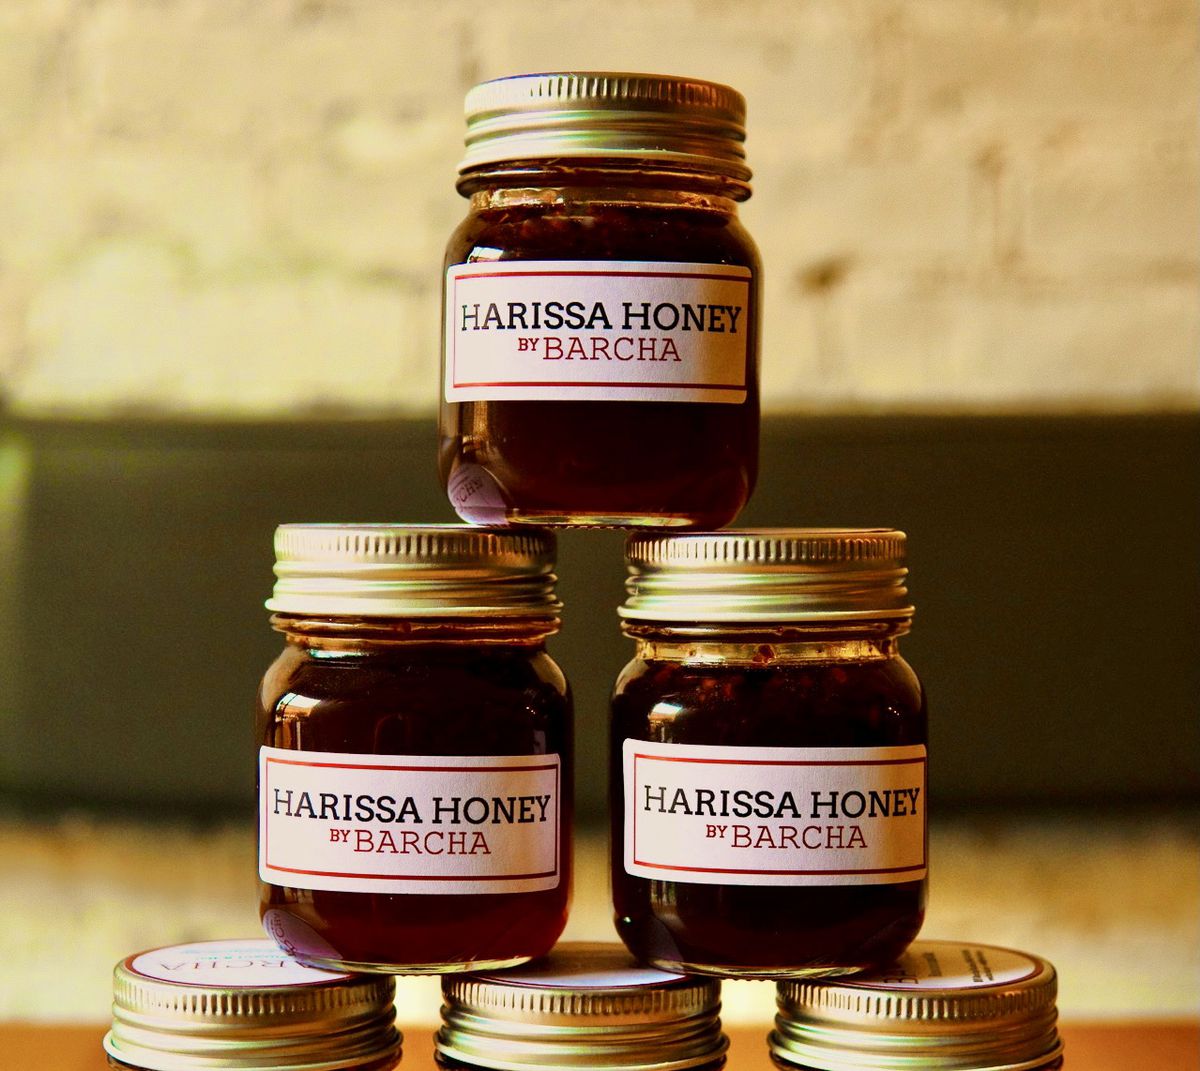 Gold-lidded jars of Barcha’s harissa hot honey stacked on top of each other.